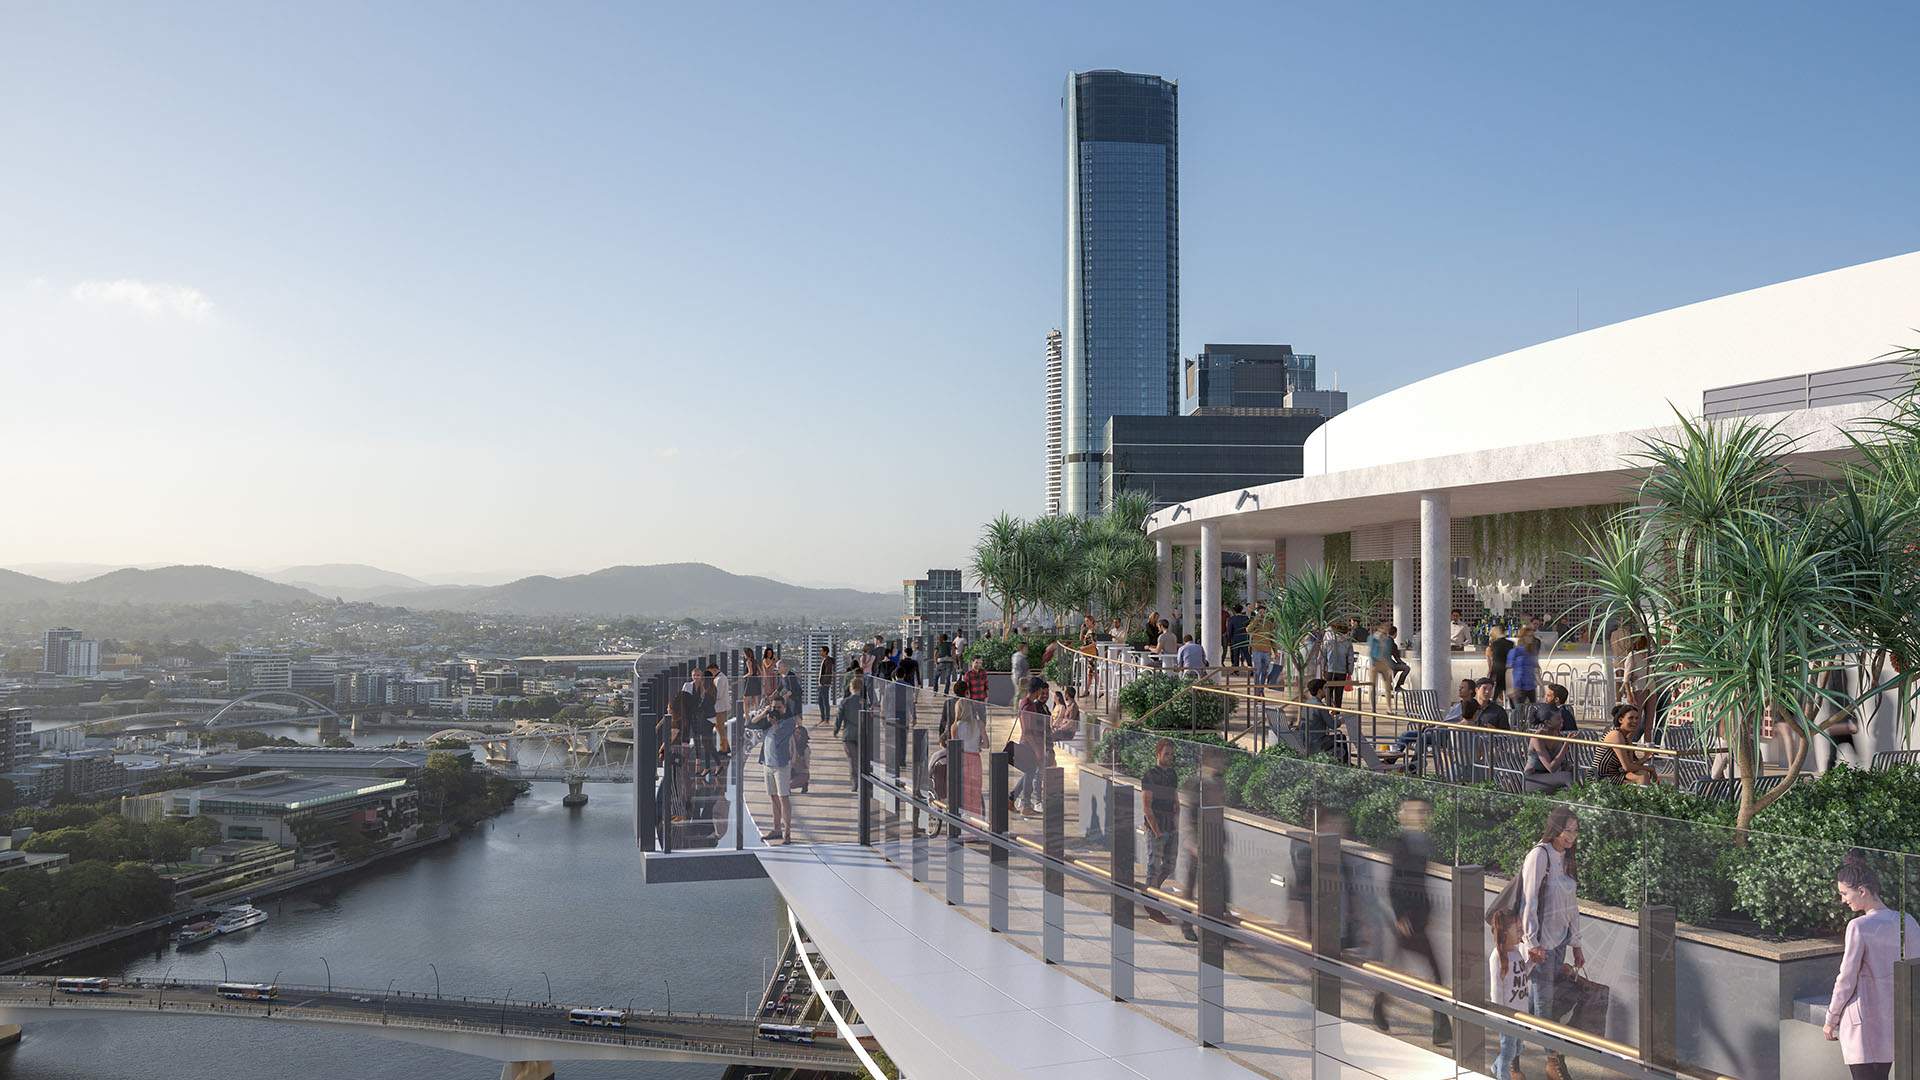 Brisbane Is Getting a 100-Metre-High Sky Deck with a Restaurant, Bar and Glass-Floor Viewing Platform